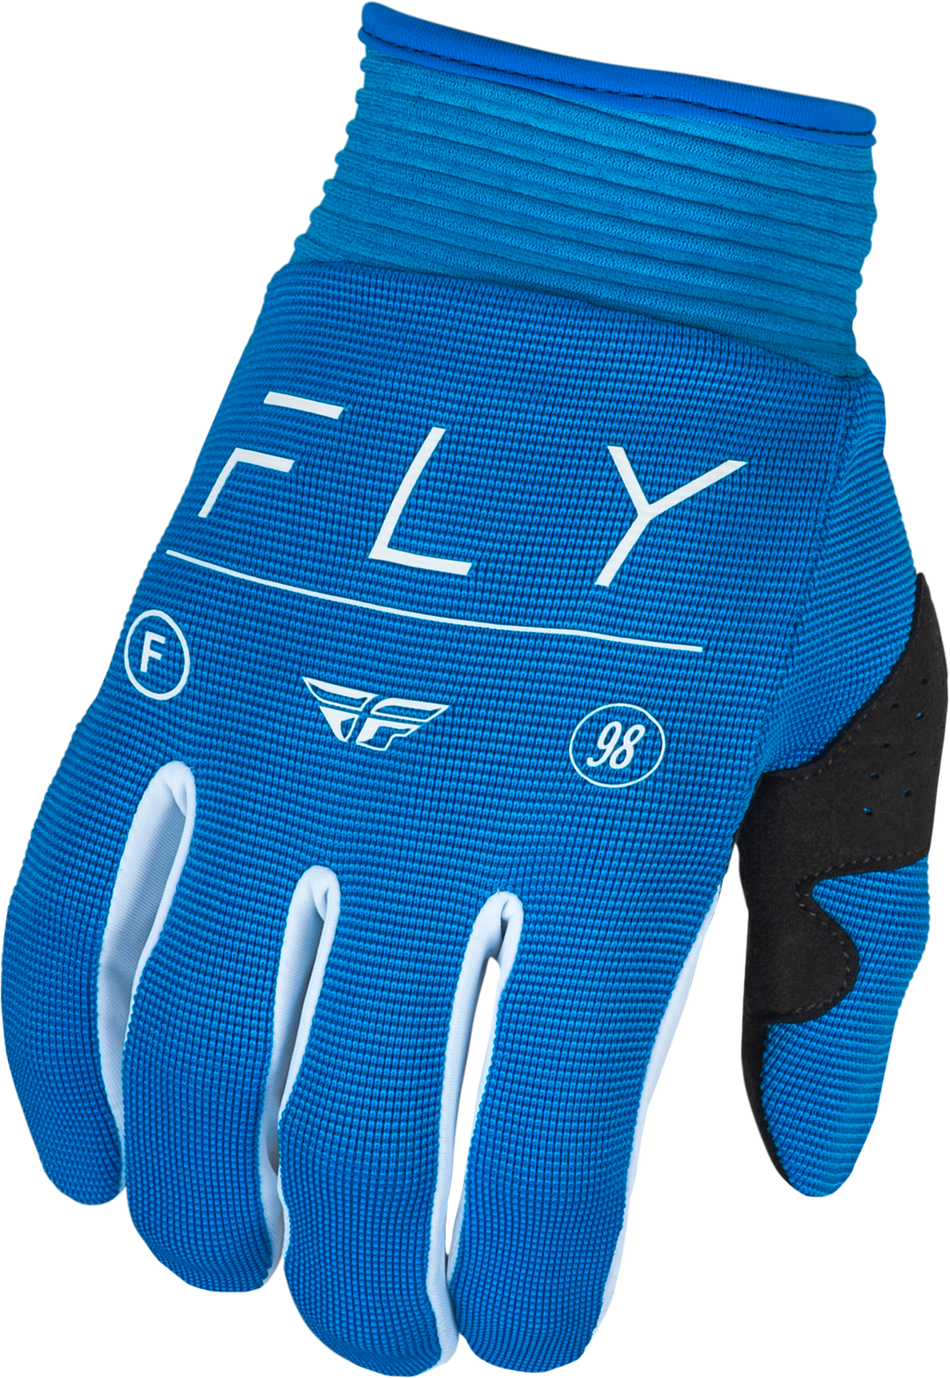 FLY RACING F-16 Gloves True Blue/White Lg 377-914L